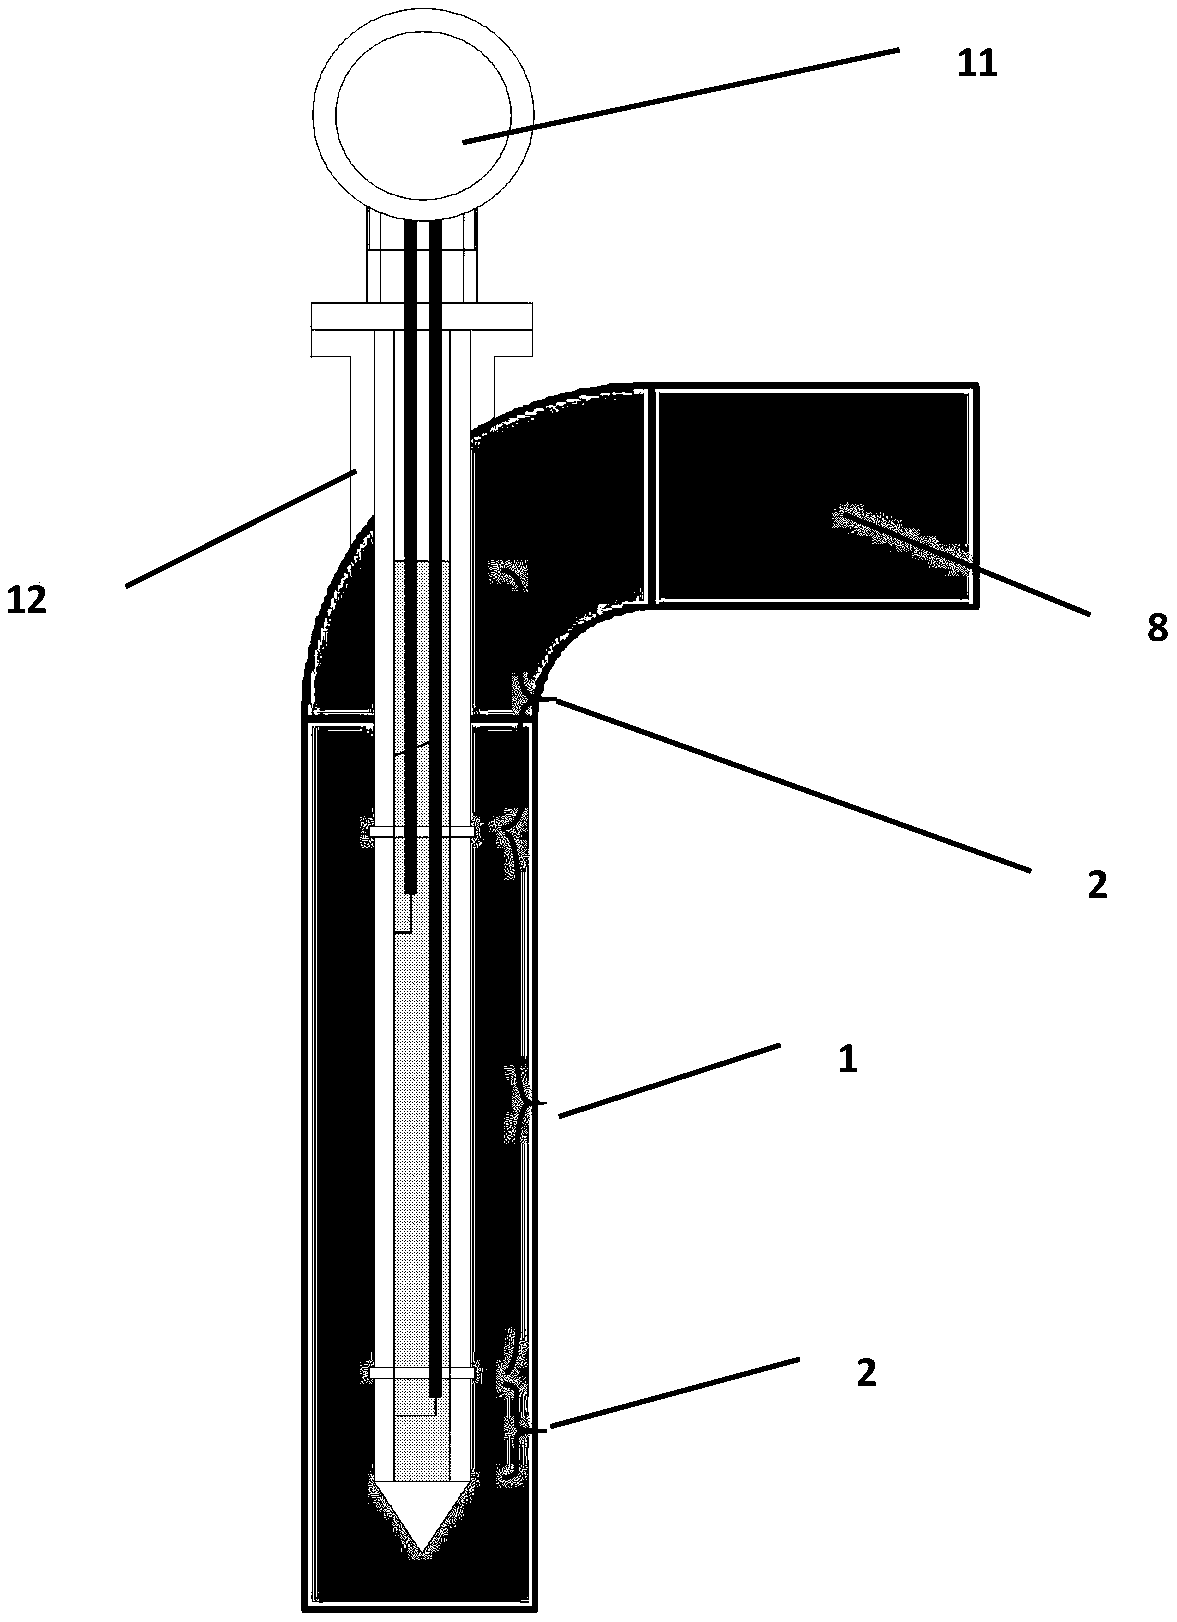 Measuring device for moisture content and mineralization degree based on plug-in impedance sensor